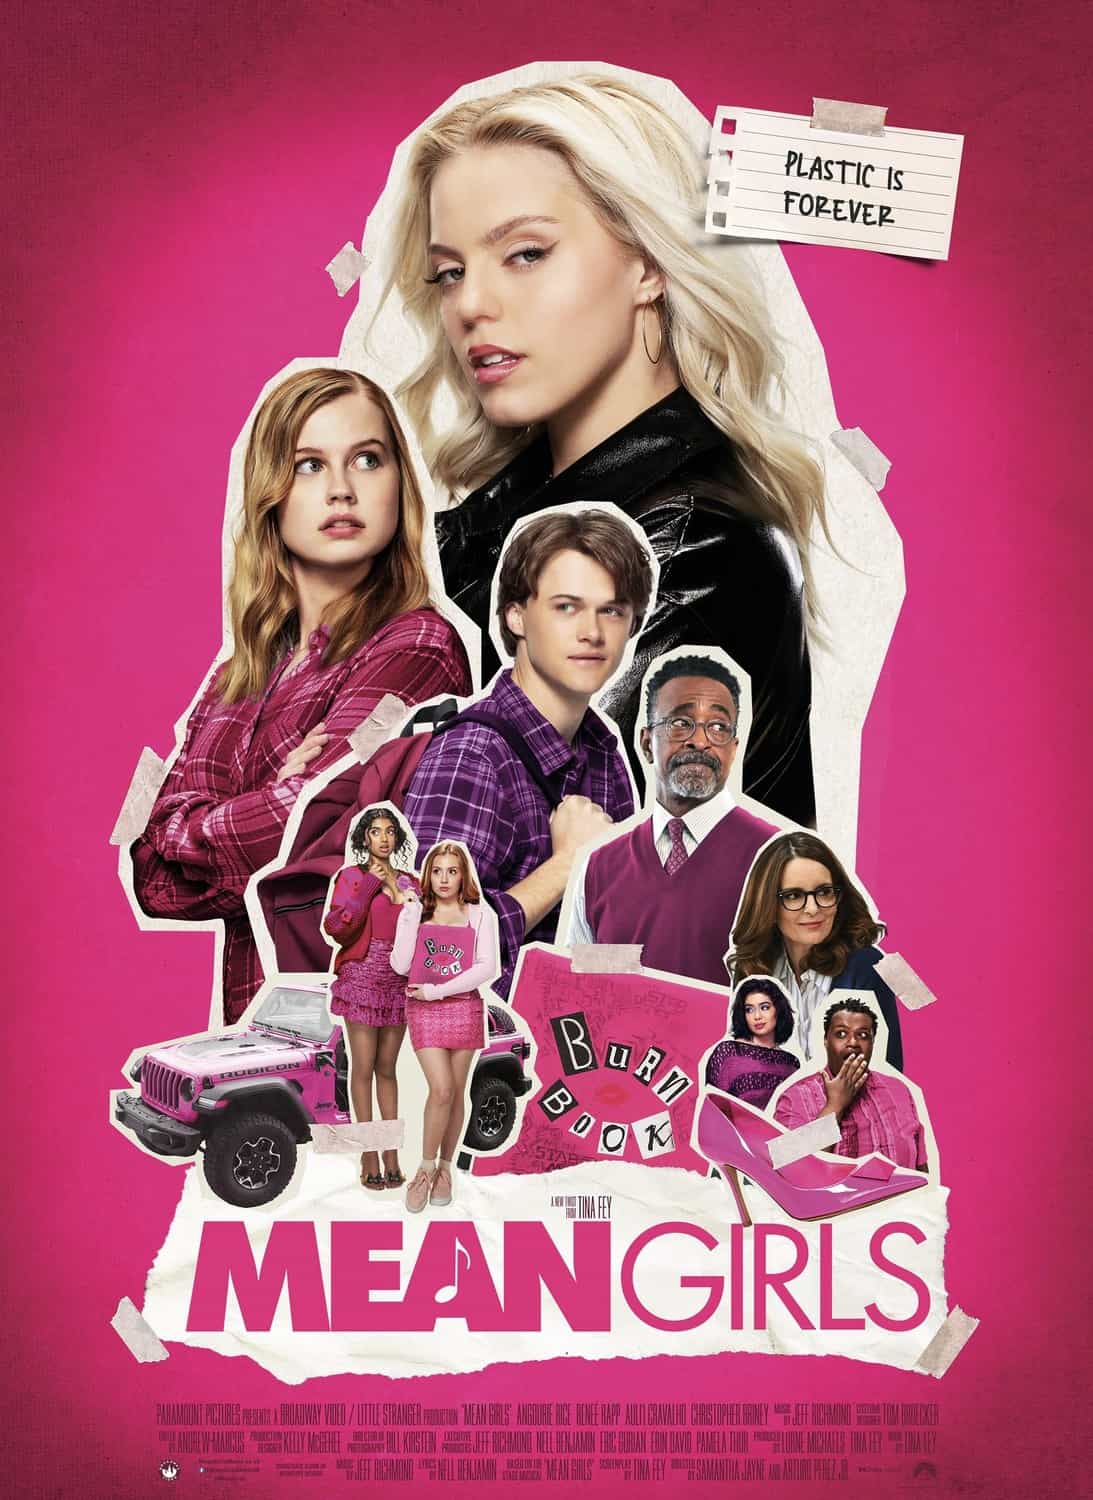 Mean Girls has been given a 12A age rating in the UK for moderate sex references, language, discrimination